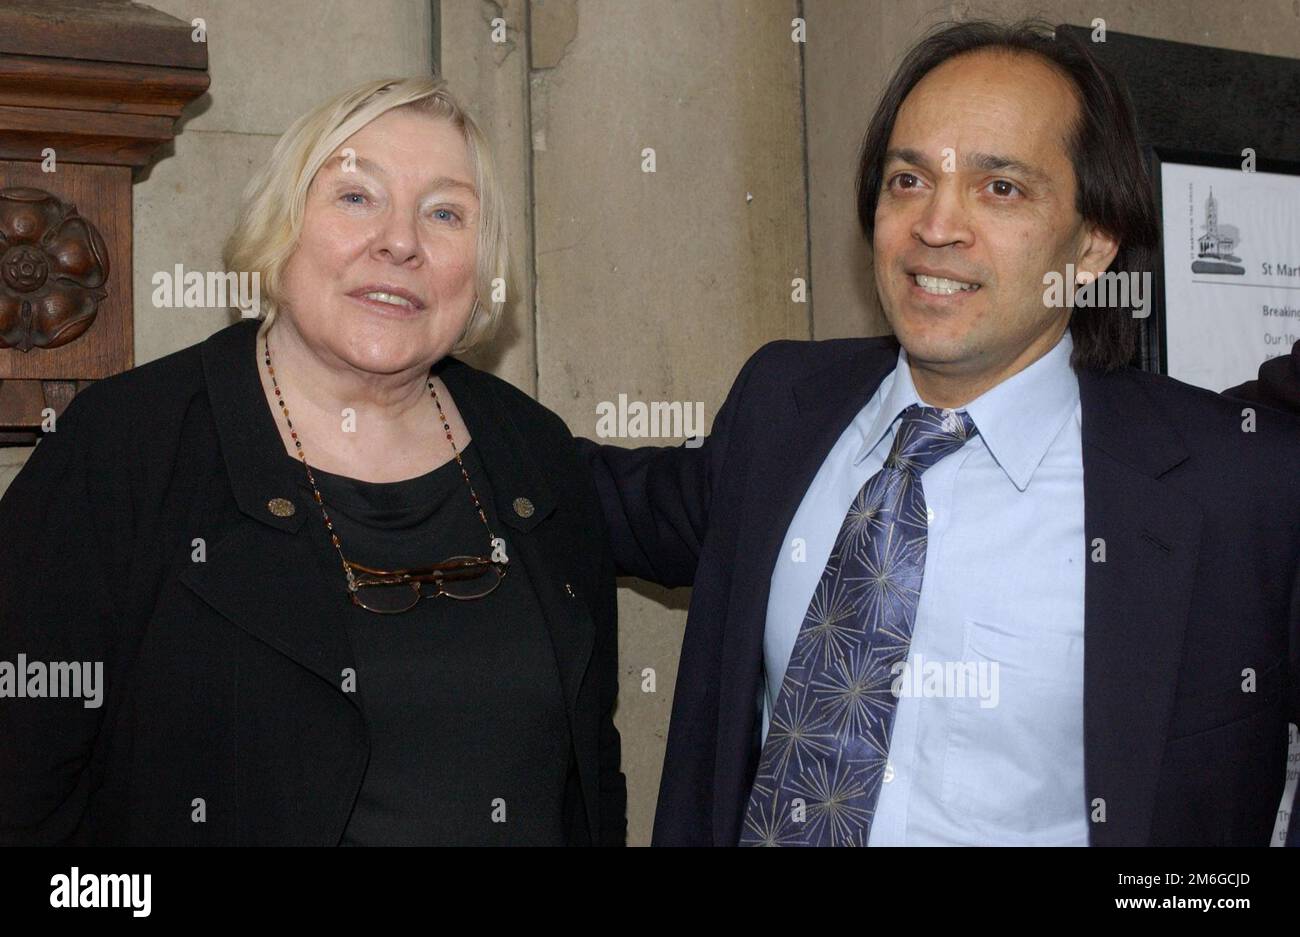 File photo dated 17/3/2004 of Fay Weldon and Vikram Seth outside a memorial service held for late Scottish publisher Giles Gordon at St Martin's in the Fields on Trafalgar Square in London. Author Fay Weldon, known for works including The Life And Loves Of A She-Devil and Praxis, has died aged 91. The novelist, playwright and screenwriter's body of work includes more than 30 novels as well as short stories and plays written for television, radio and the stage. Issue date: Wednesday January 4, 2023. Stock Photo